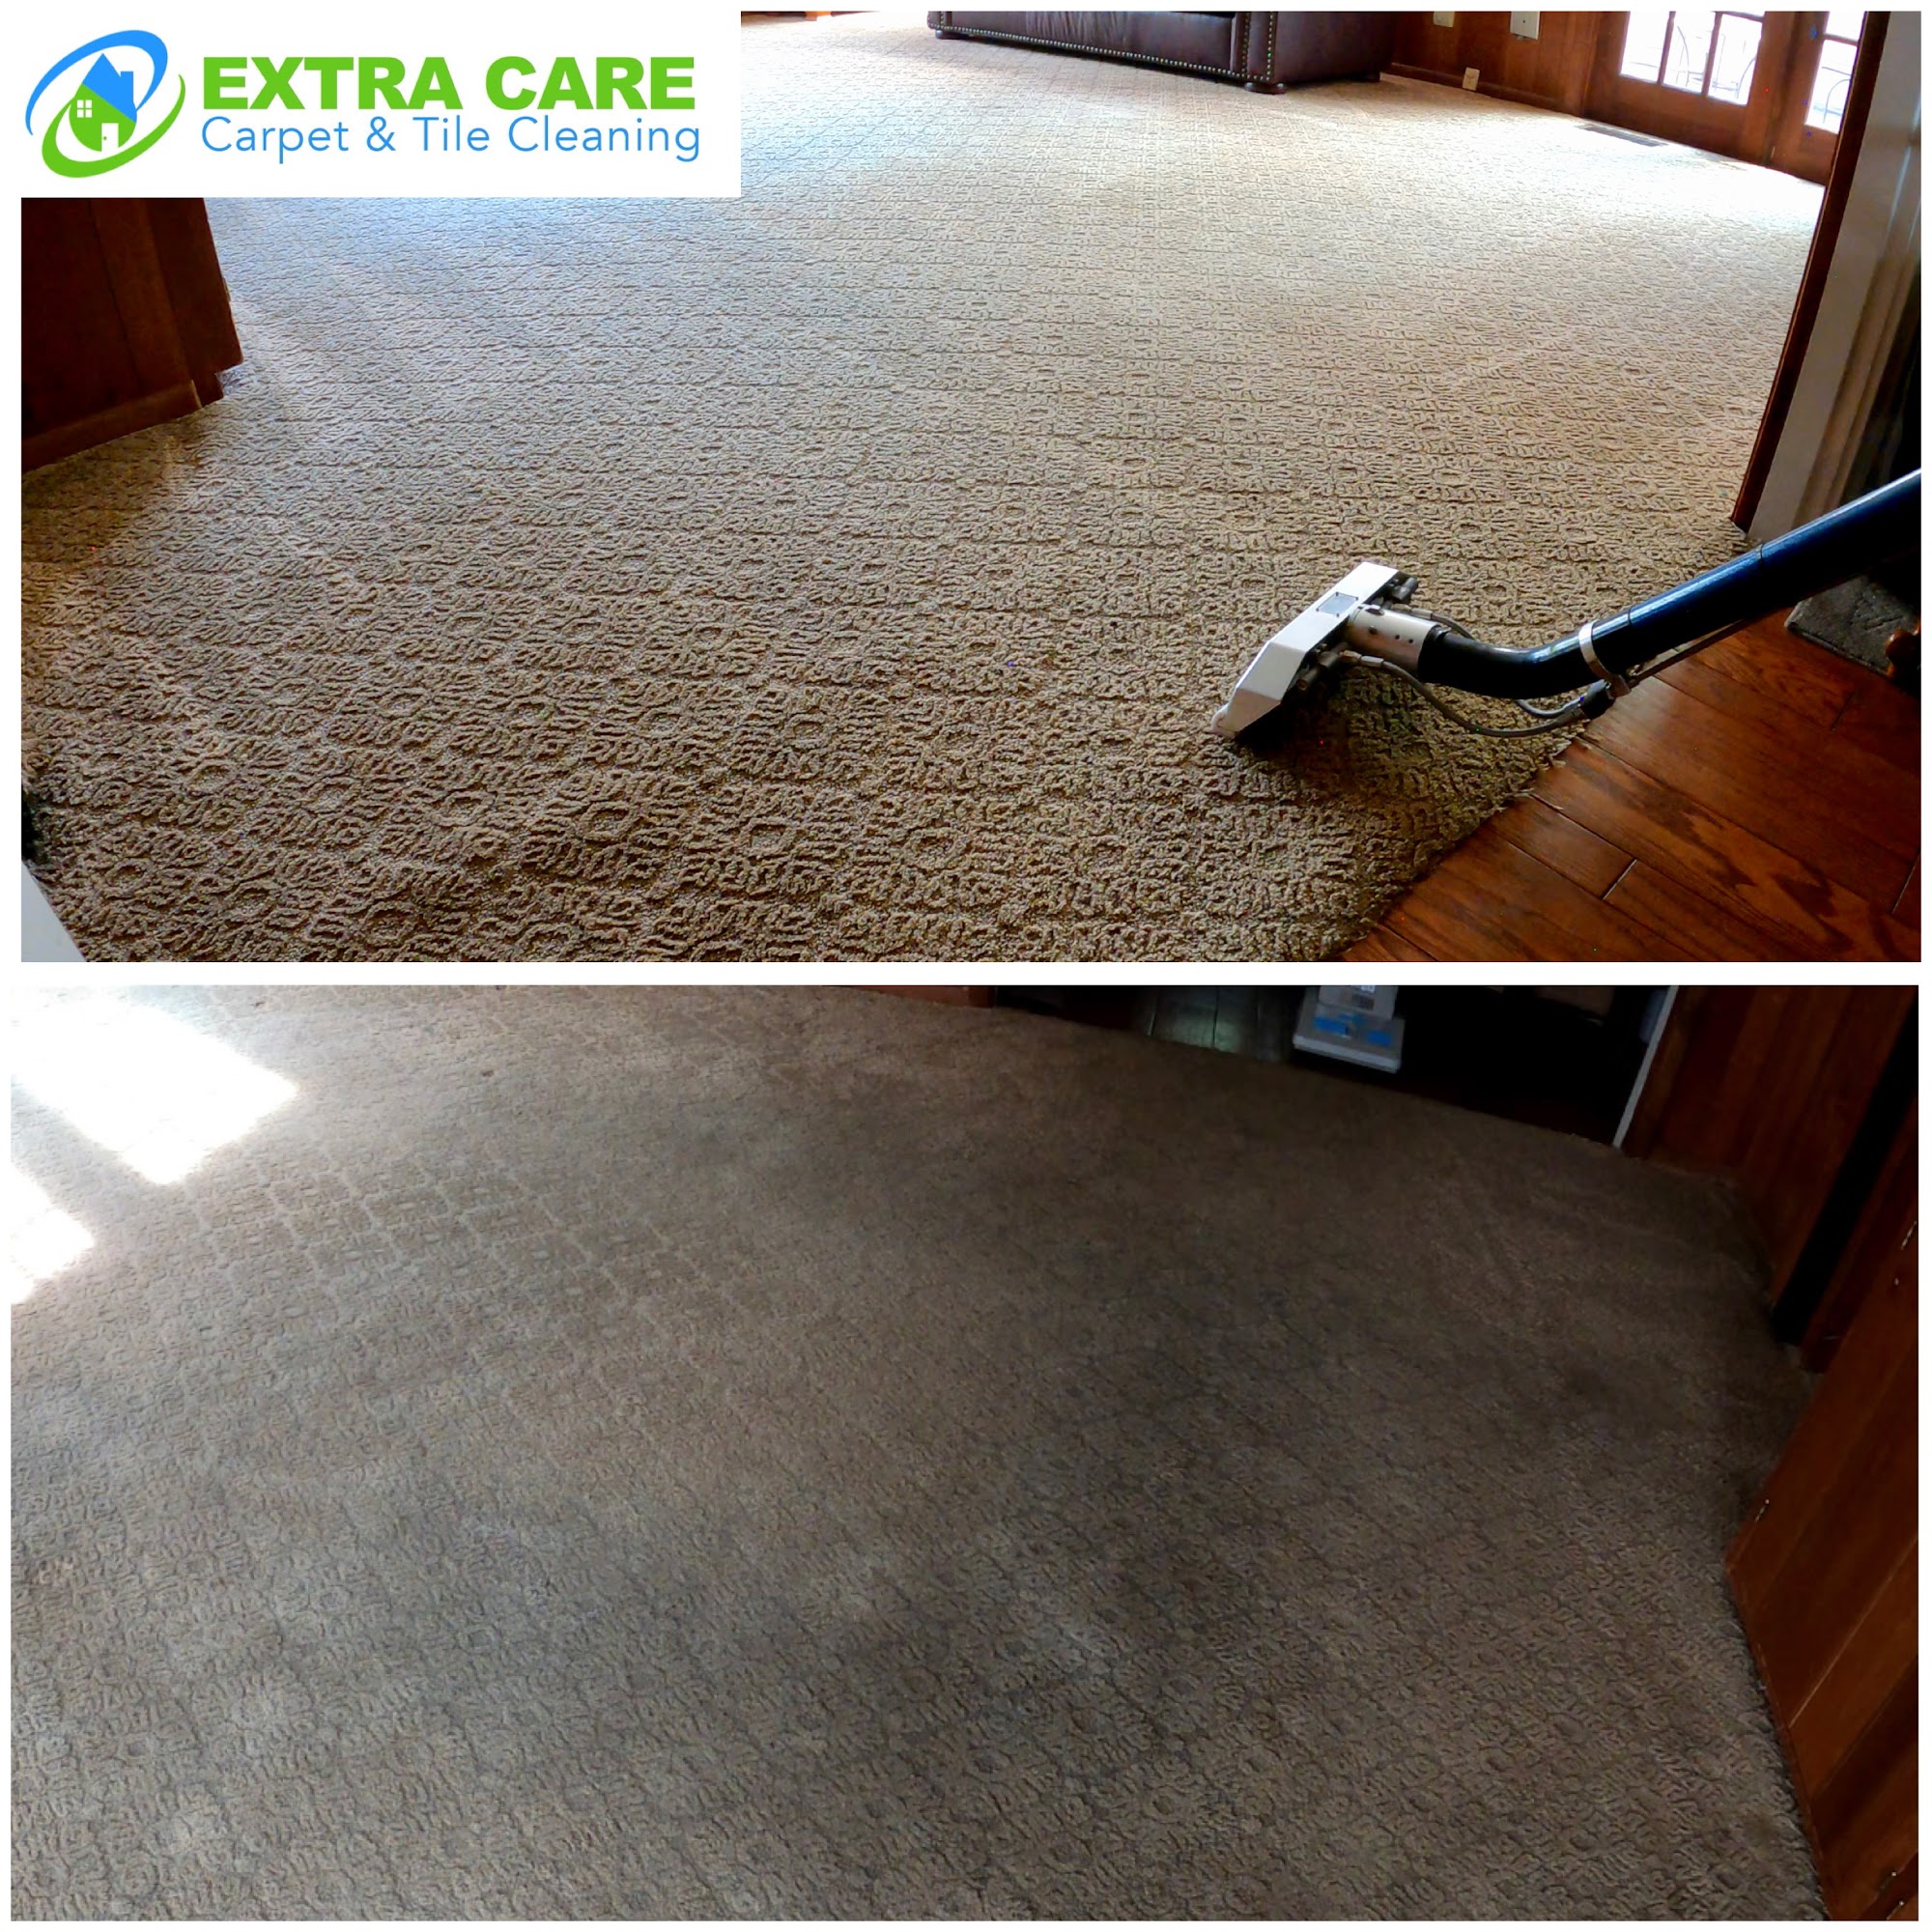 Extra Care Carpet & Tile Cleaners